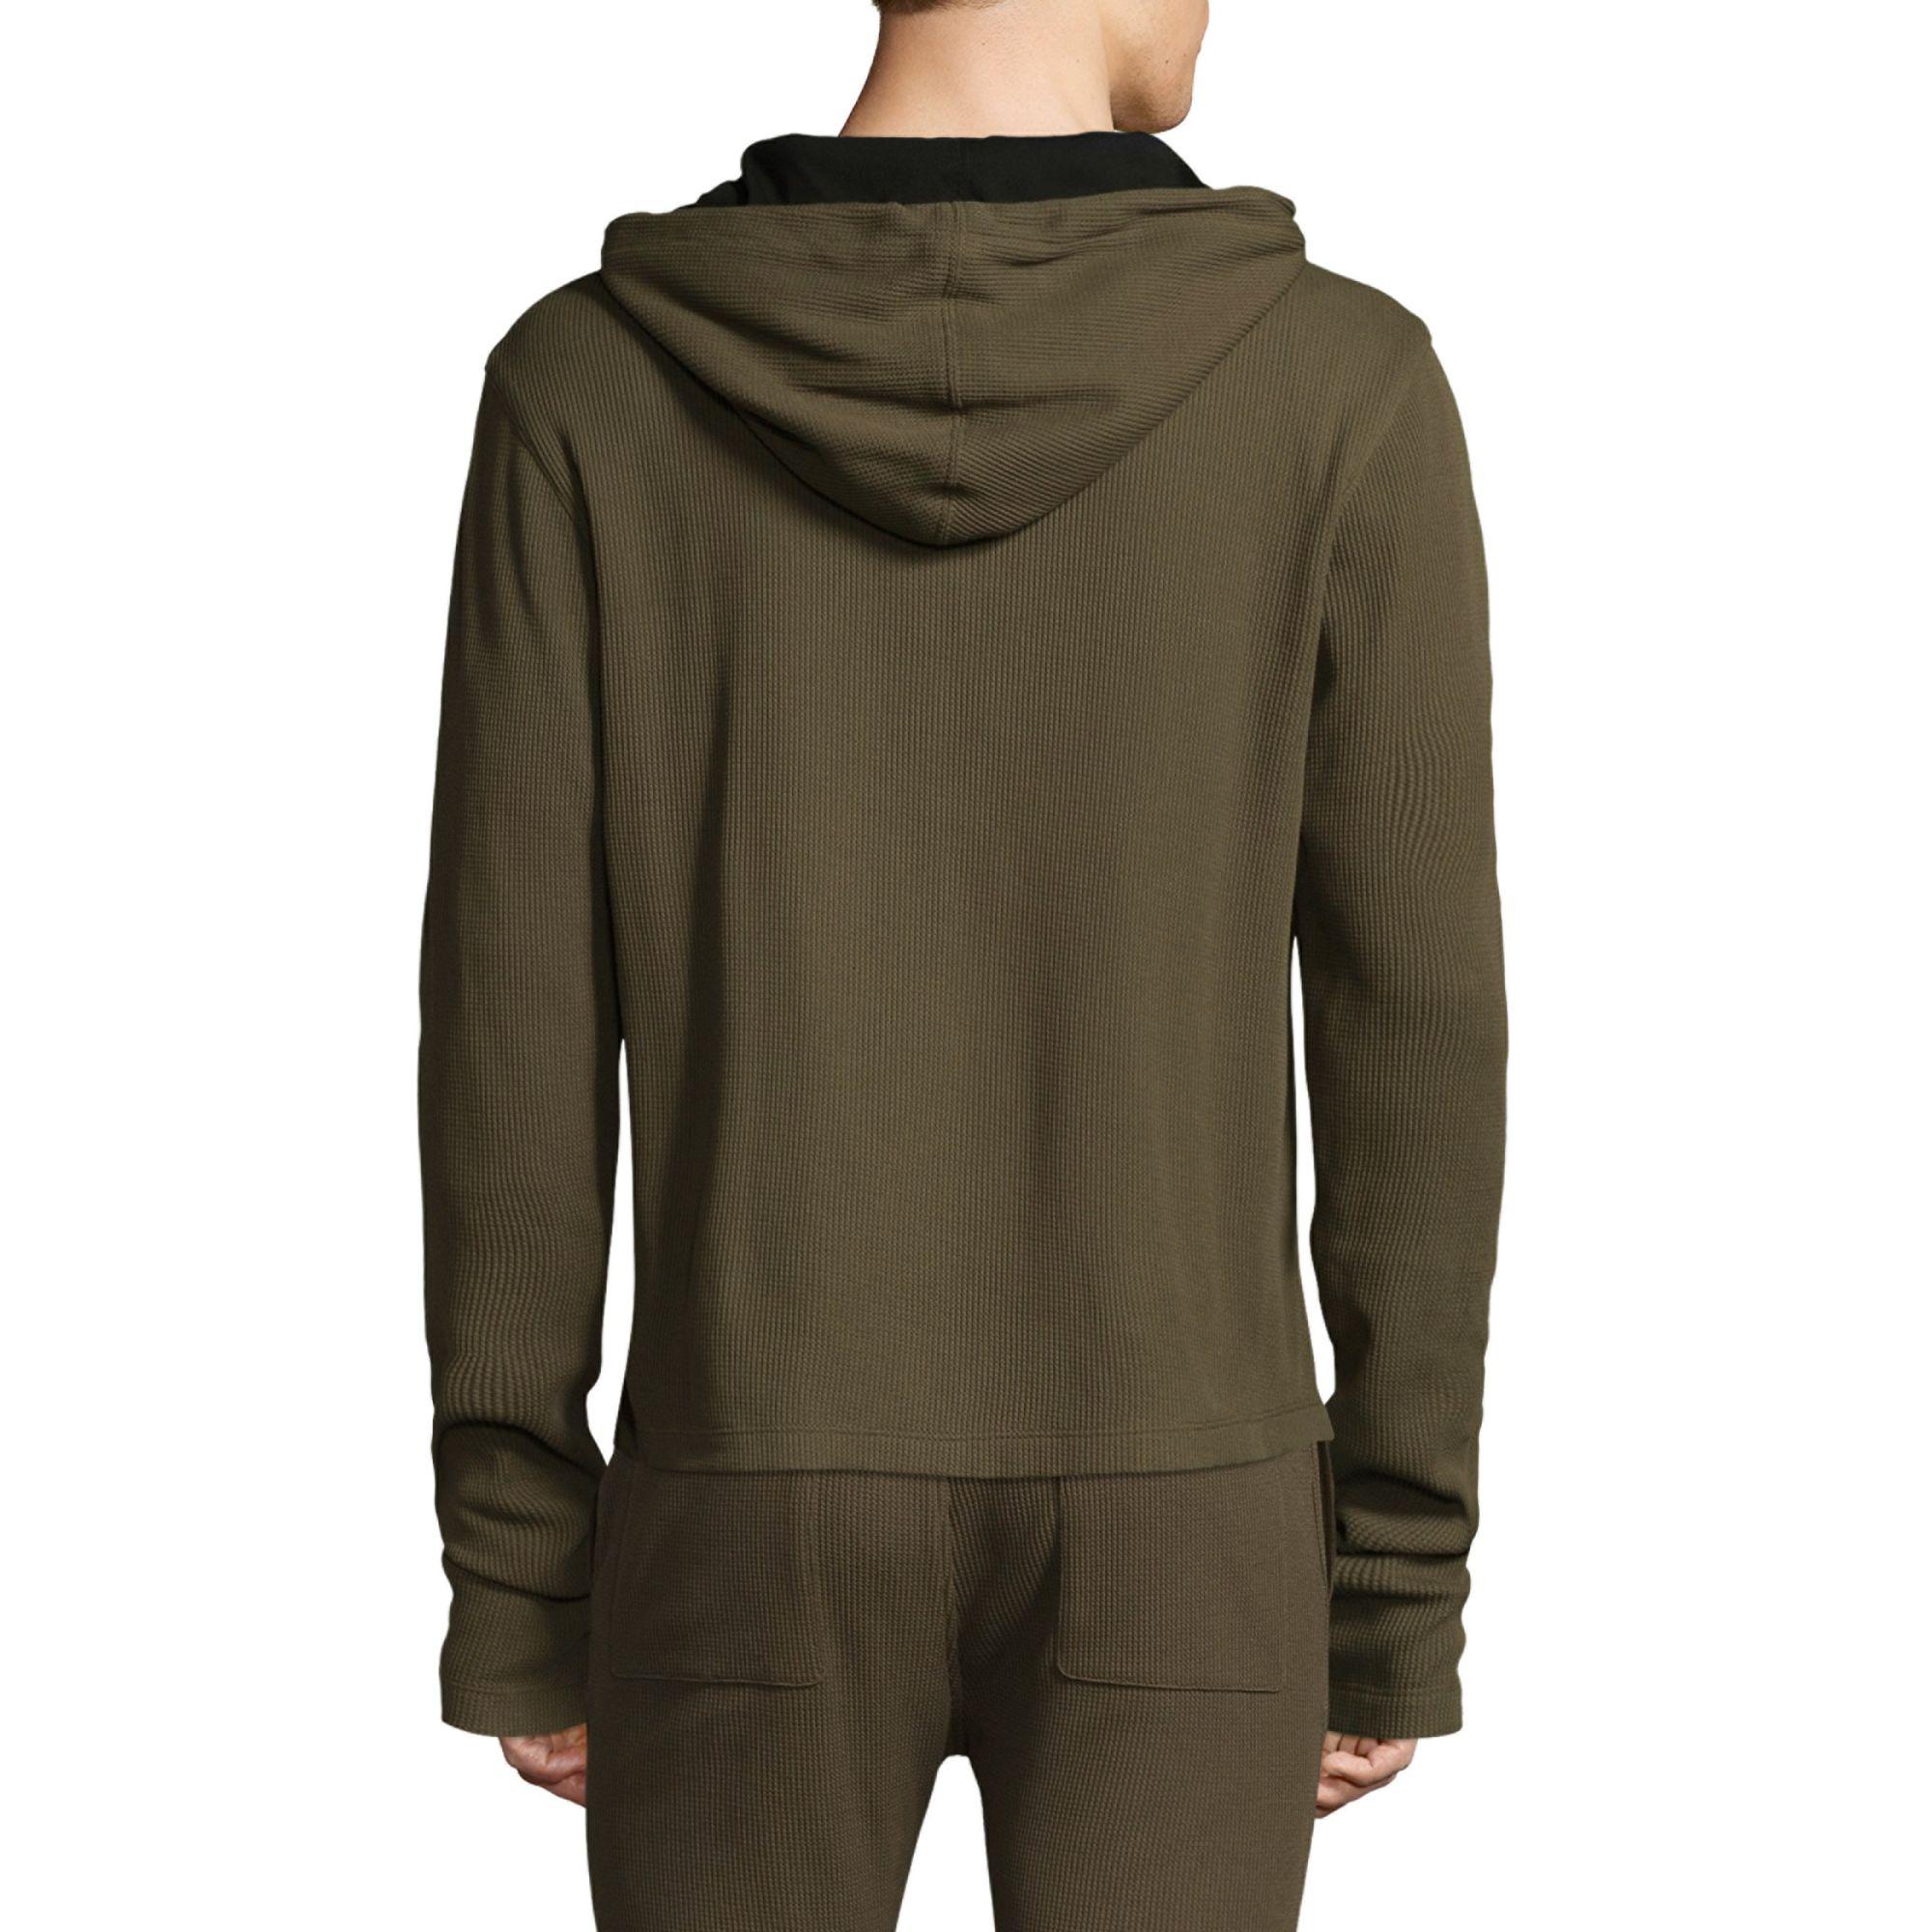 Helmut Lang Waffle-knit Cotton Zip-up Hoodie in Black for Men - Lyst